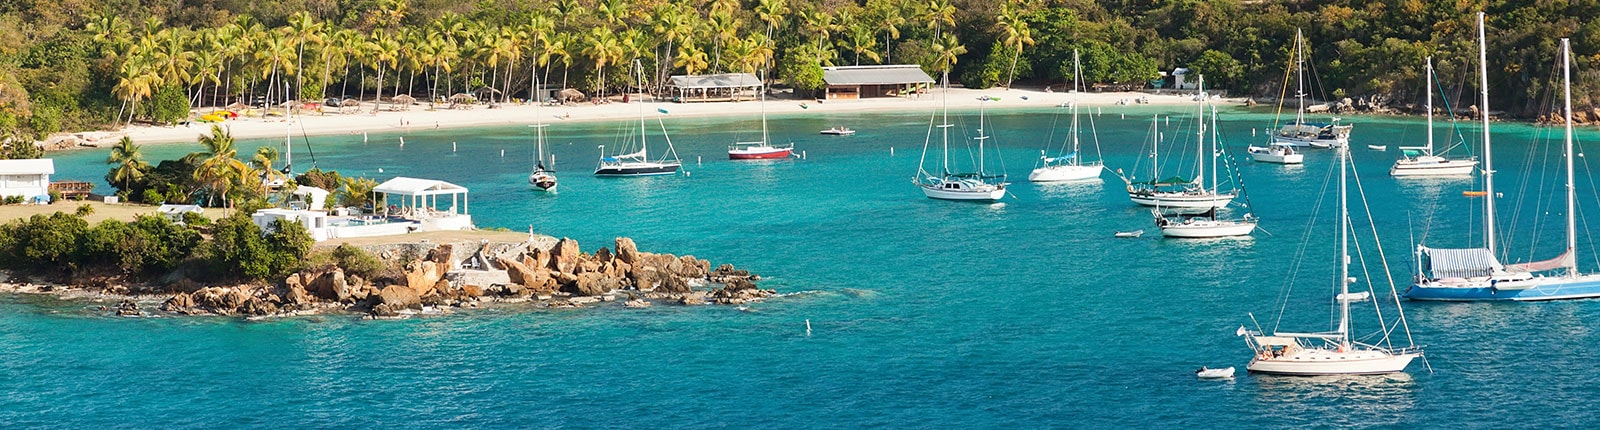 Sailboats anchored in a cove of St. Thomas, US Virgin Islands